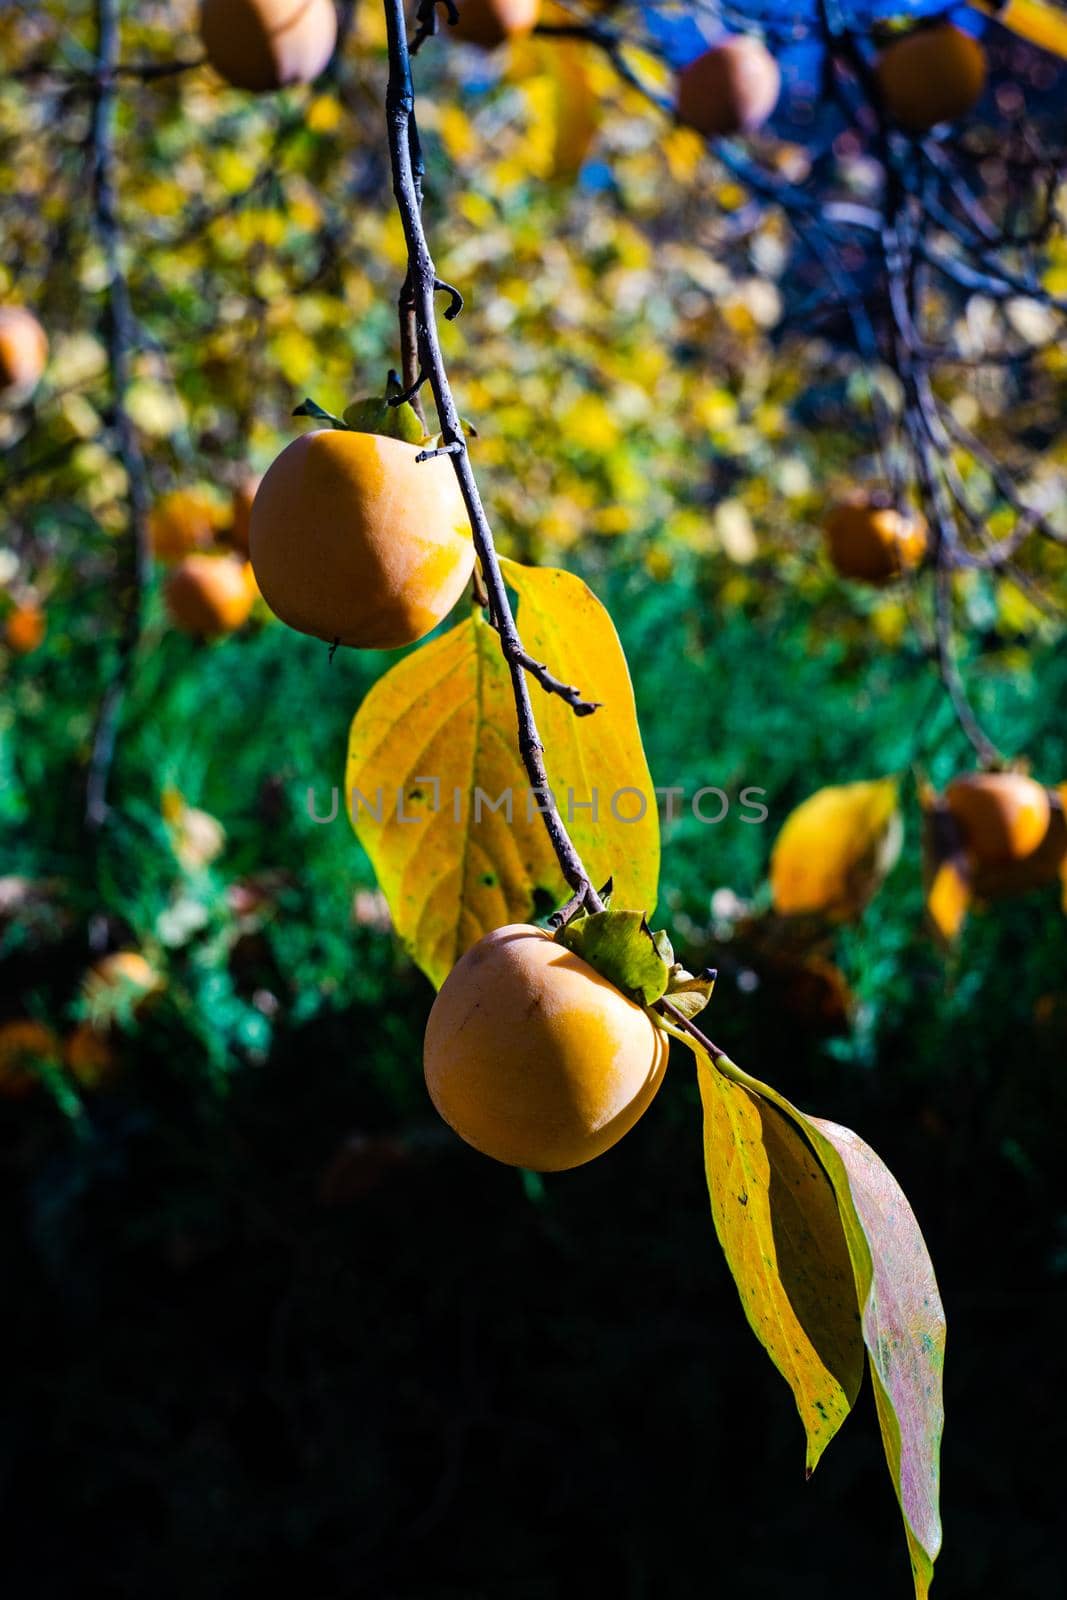 Ripe persimmon fruits in the garden by Elet